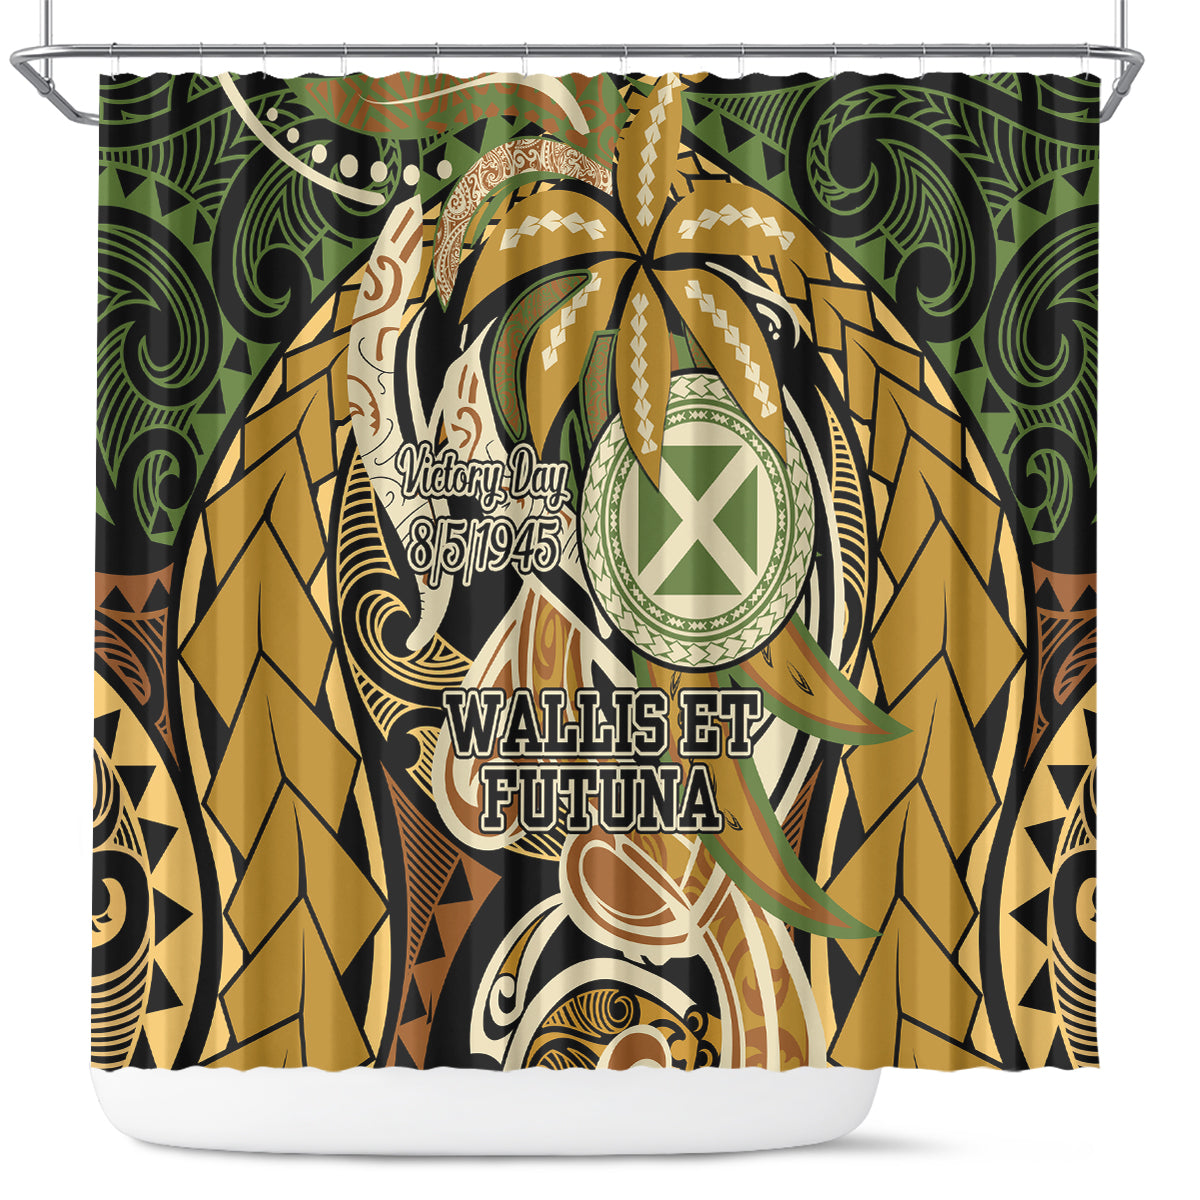 Wallis and Futuna Victory Day Shower Curtain Since 1945 with Polynesian Platinum Floral Tribal